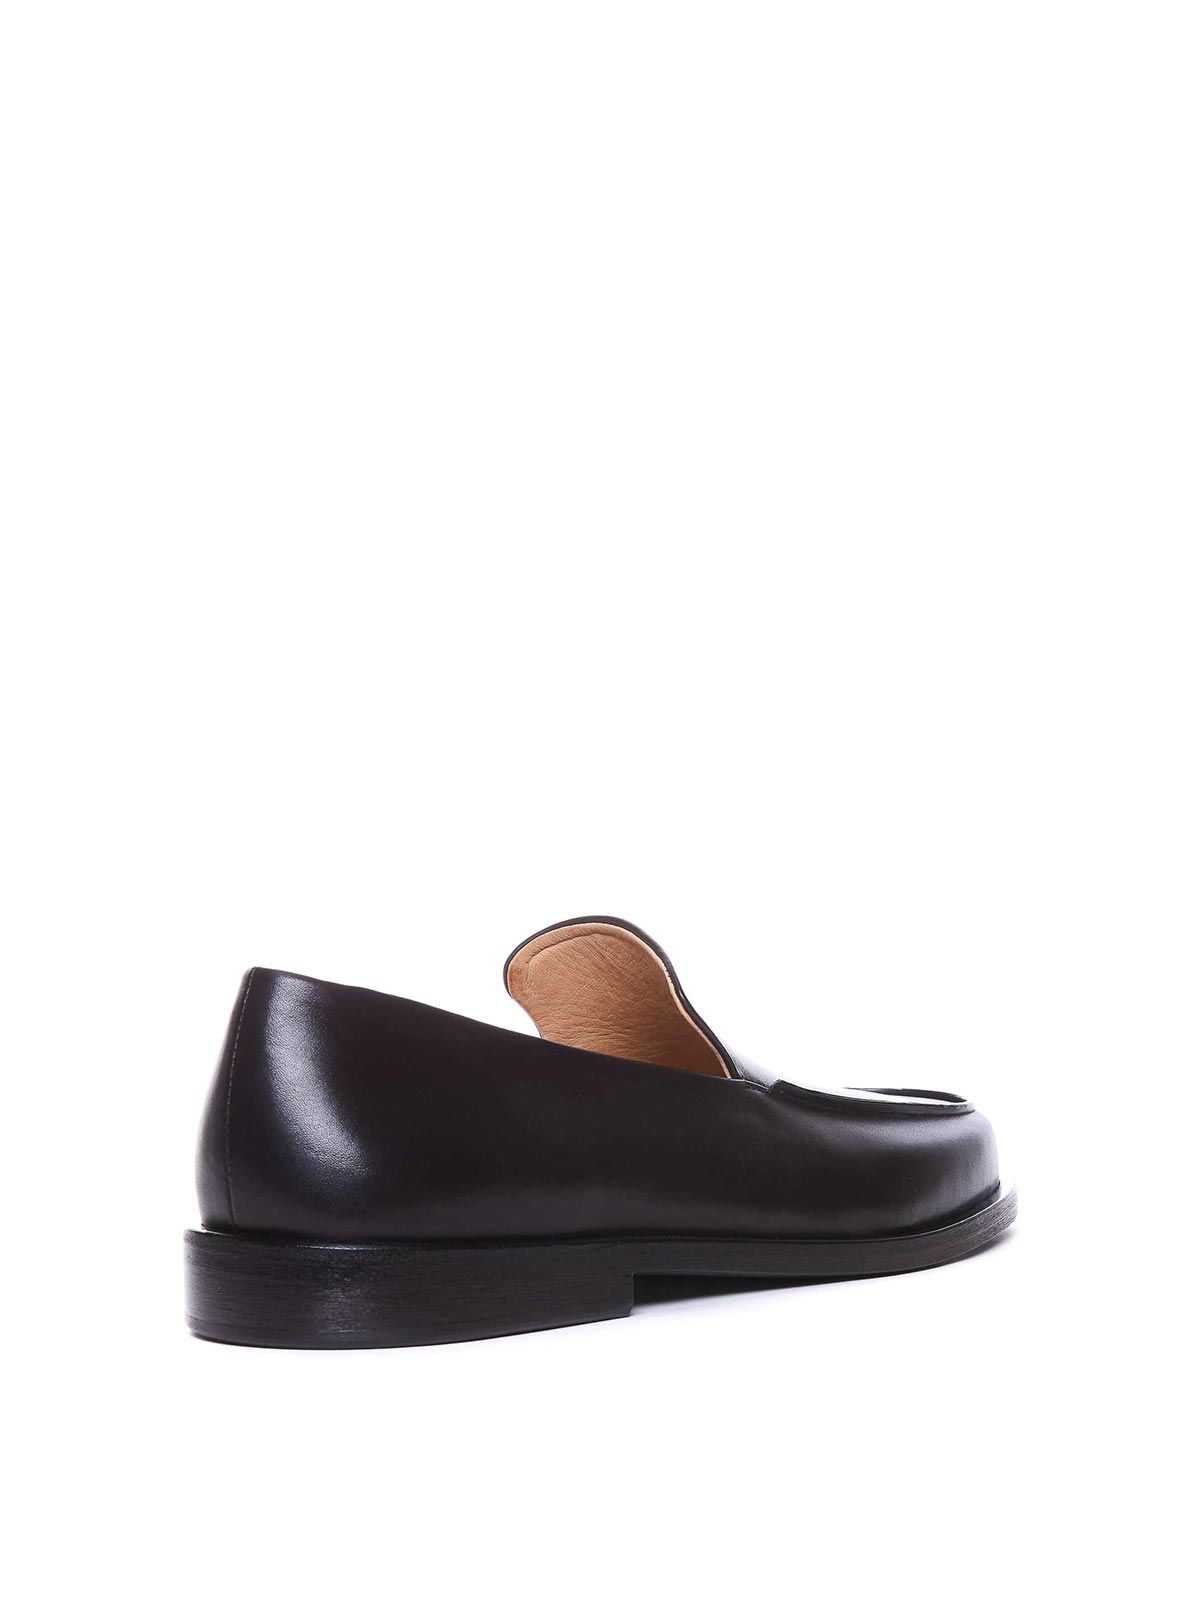 Shop Marsèll Brown Loafers Slip On Round Toe